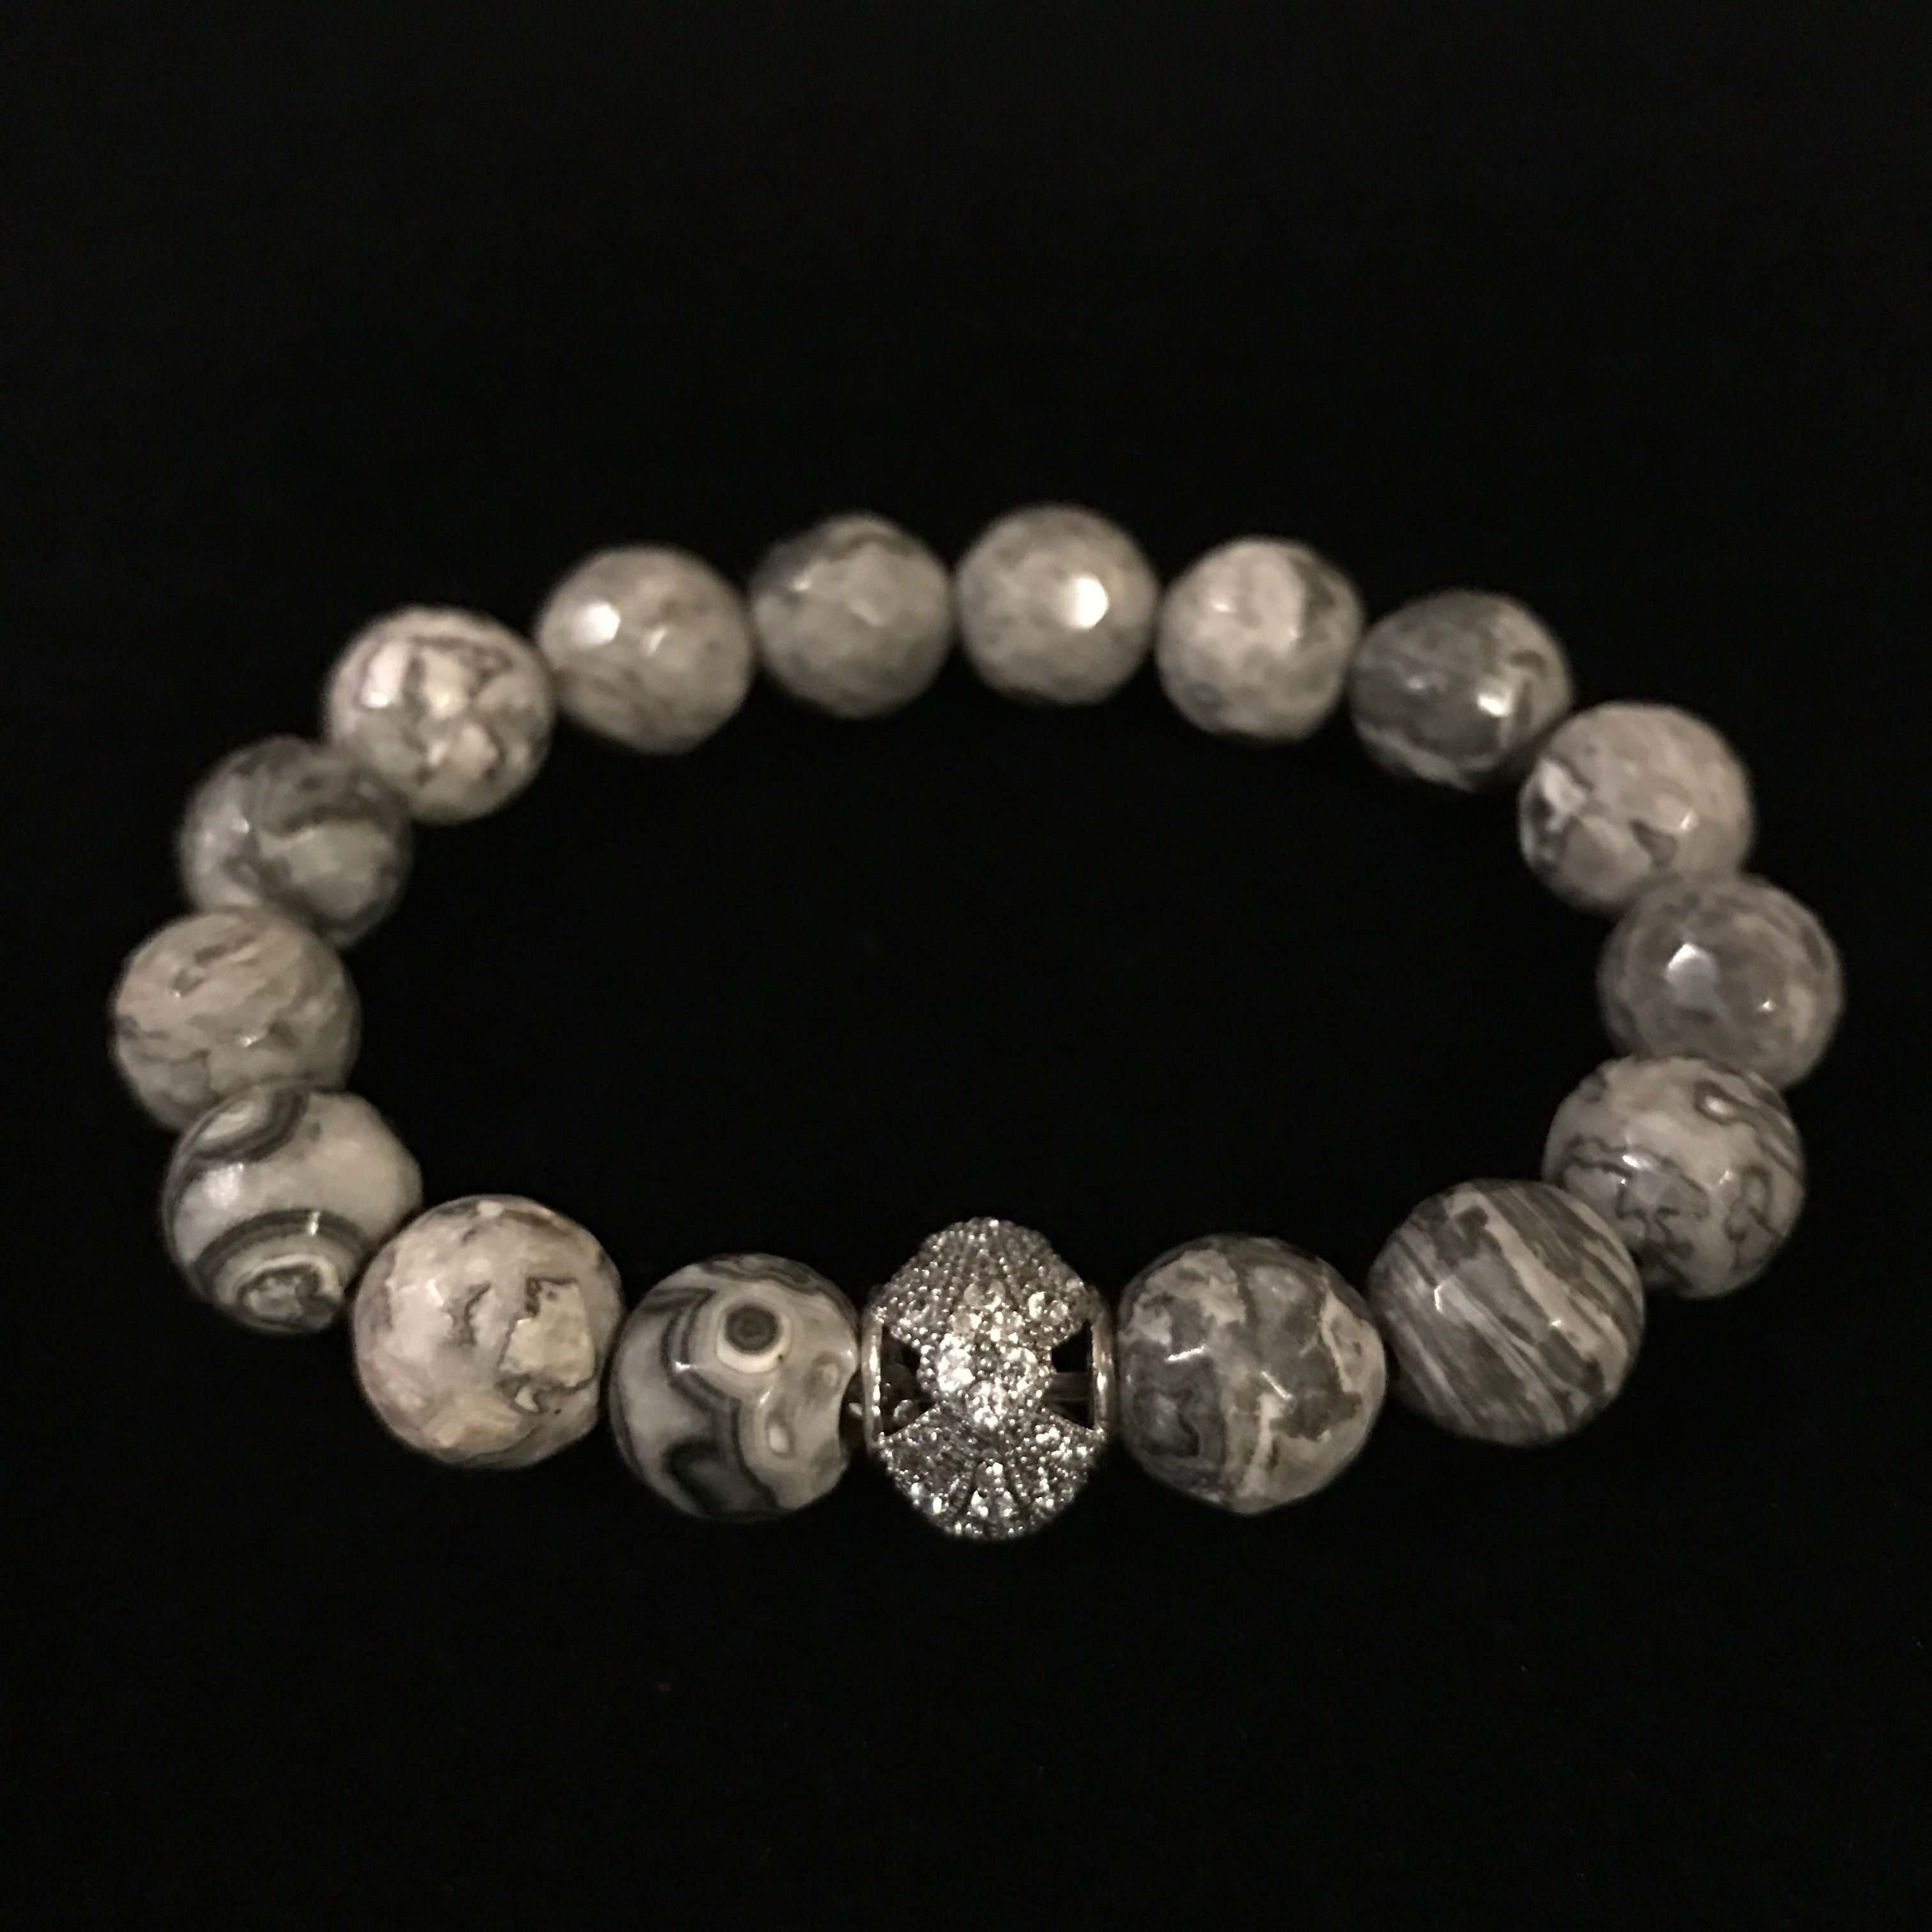 Picasso Crest Grey Beads